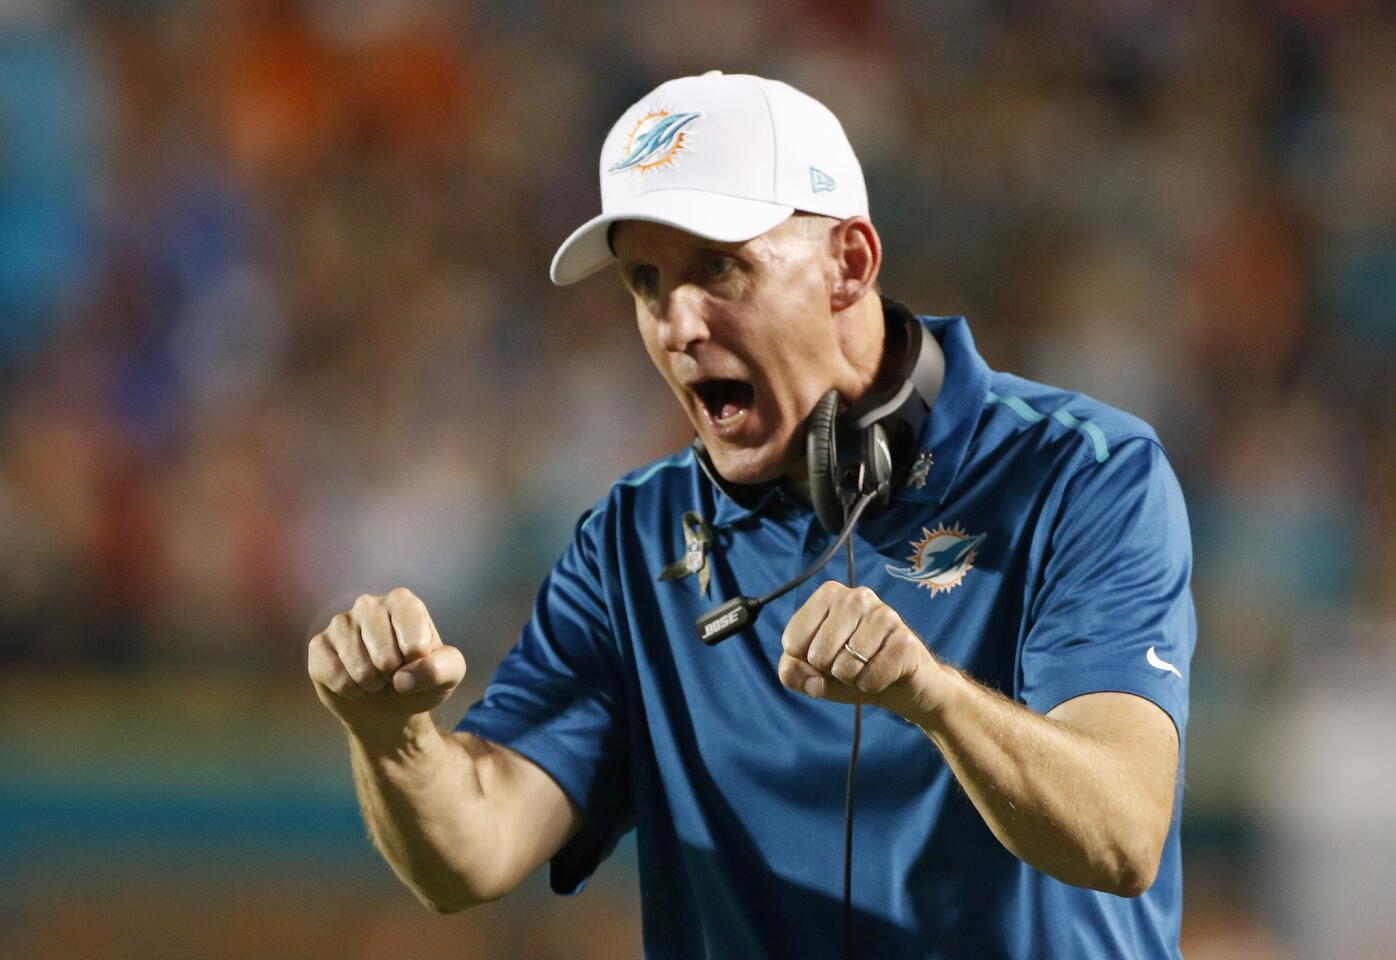 MIAMI GARDENS, FL - NOVEMBER 13: Head coach Joe Philbin of the Miami Dolphins argues a call in the second quarter of play against the Buffalo Bills in a game at Sun Life Stadium on November 13, 2014 in Miami Gardens, Florida. (Photo by Marc Serota/Getty Images) ORG XMIT: 507866137